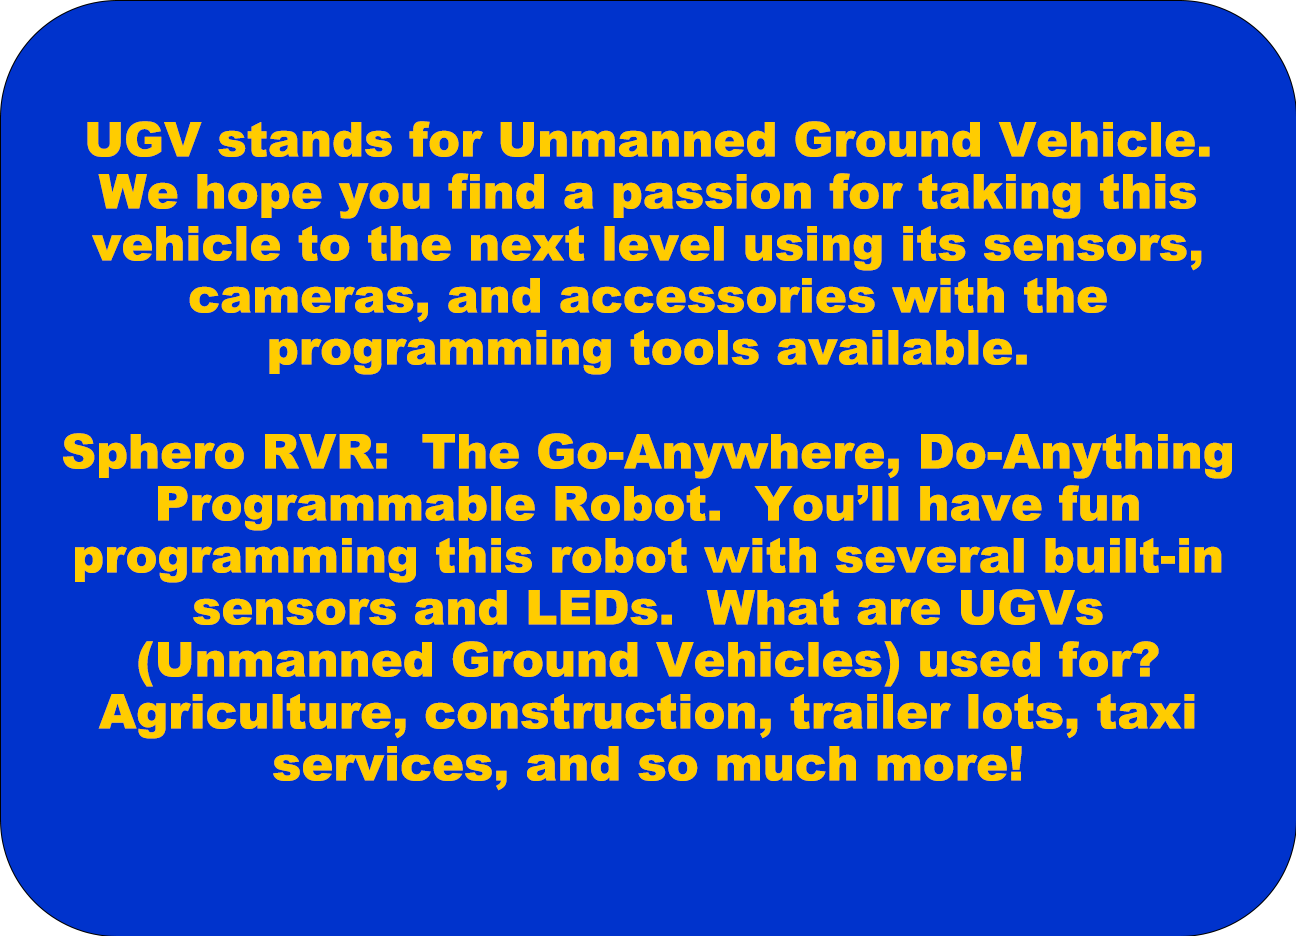  UGV stands for Unmanned Ground Vehicle. We hope you find a passion for taking these vehicles to the next level using their sensors, cameras, and accessories using the programming tools available.  Parrot Mambo Mission Drone: Drones are used in so many different careers from Agriculture and Farming to police, fire, and military jobs. Learn how to program a drone to survey a field or look for lost people. This will give you the opportunity to flex your creativity in the air!  Sphero RVR: The Go-Anywhere, Do-Anything Programmable Robot. You'll have fun programming this robot with several built-in sensors and LEDs. What are UAV's (Unmanned Autonomous Vehicles) used for? Agriculture, construction, trailer lots, taxi services, and so much more!